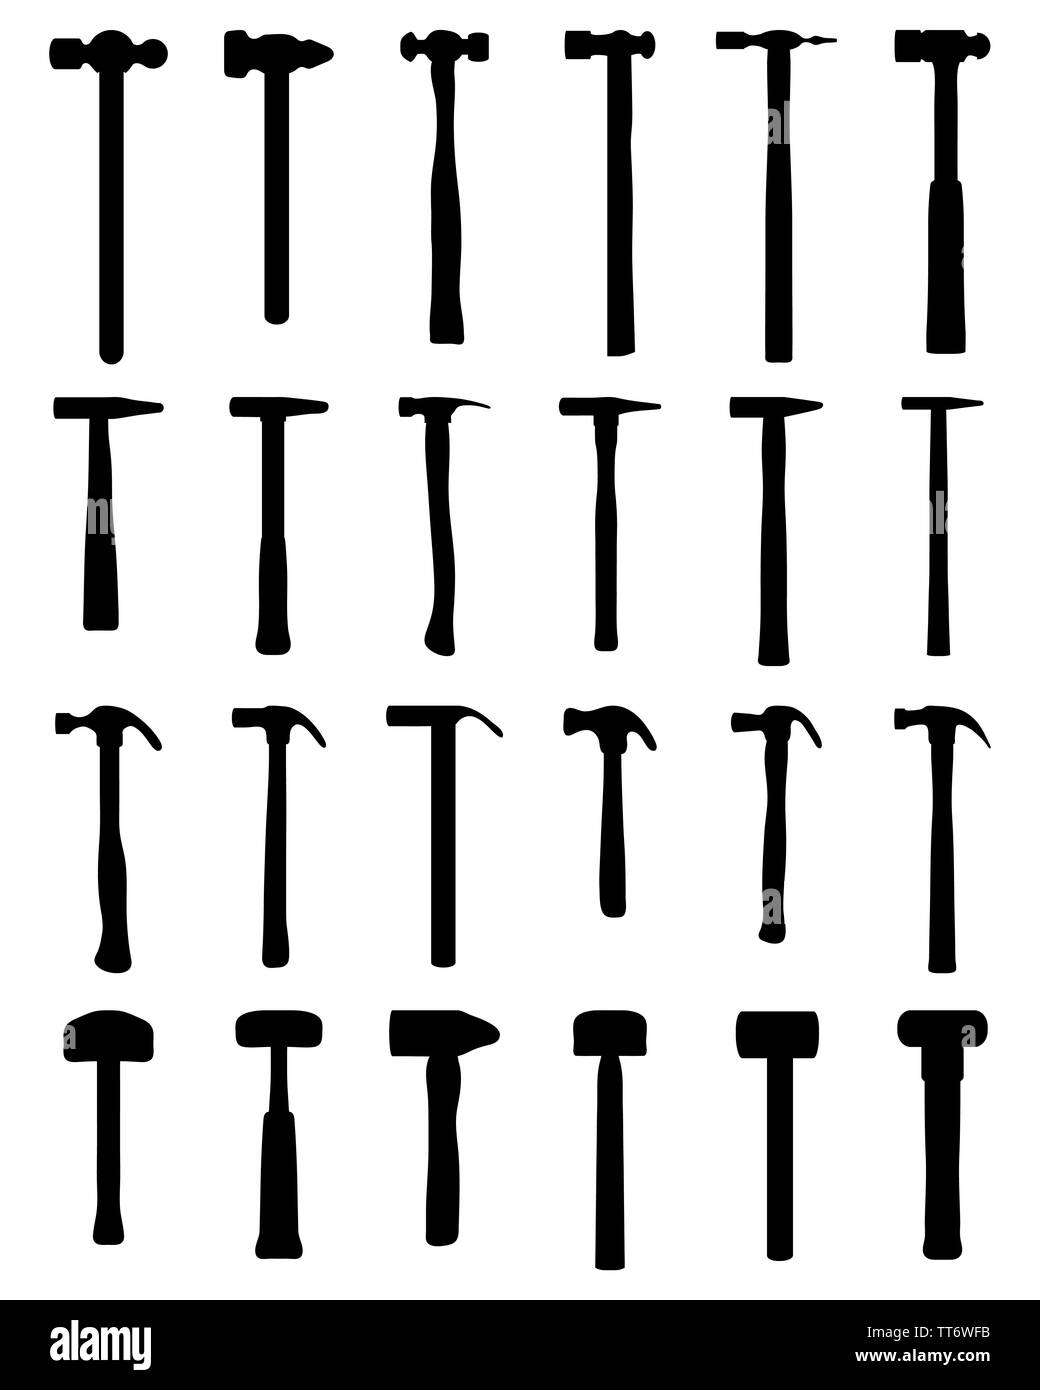 Black silhouettes of different hammer on a white background Stock Photo